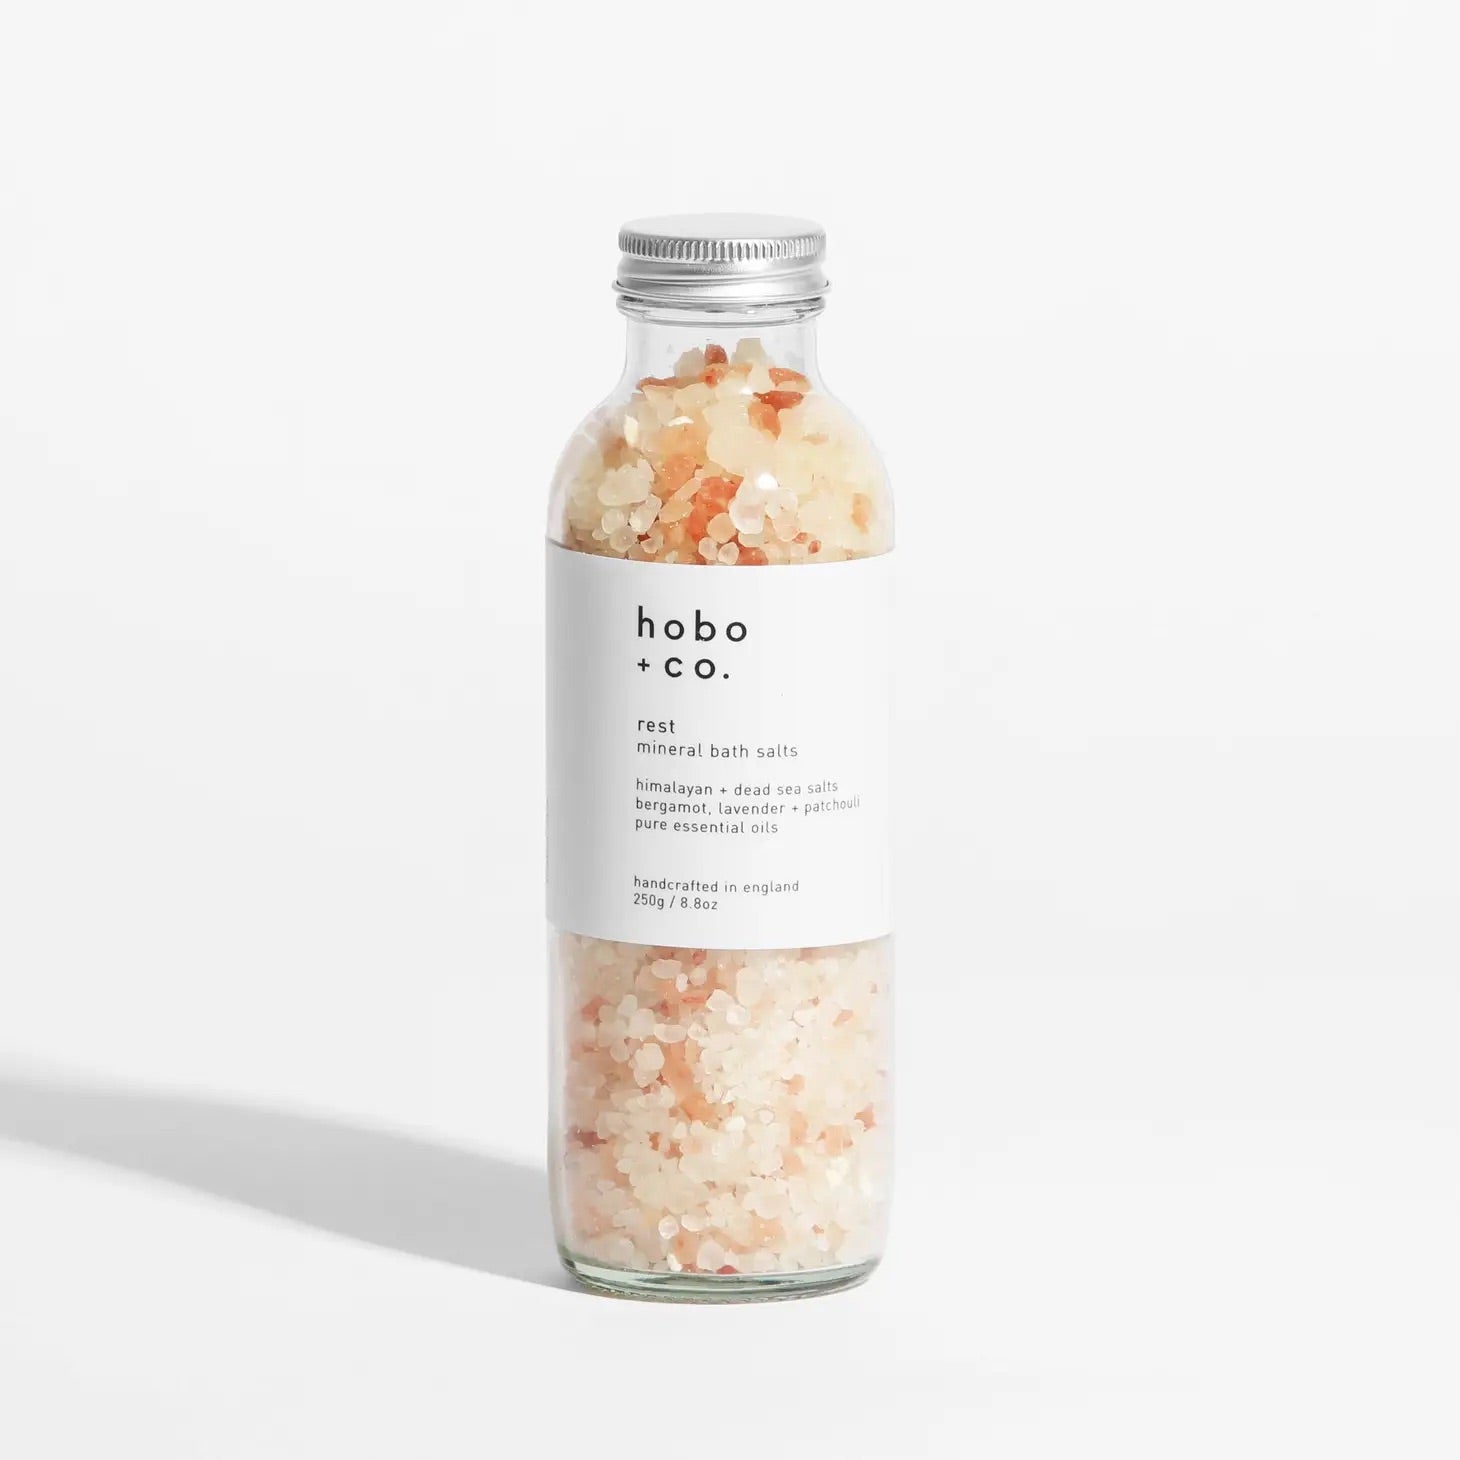 Hobo and Co Rest Mineral Bath Salts